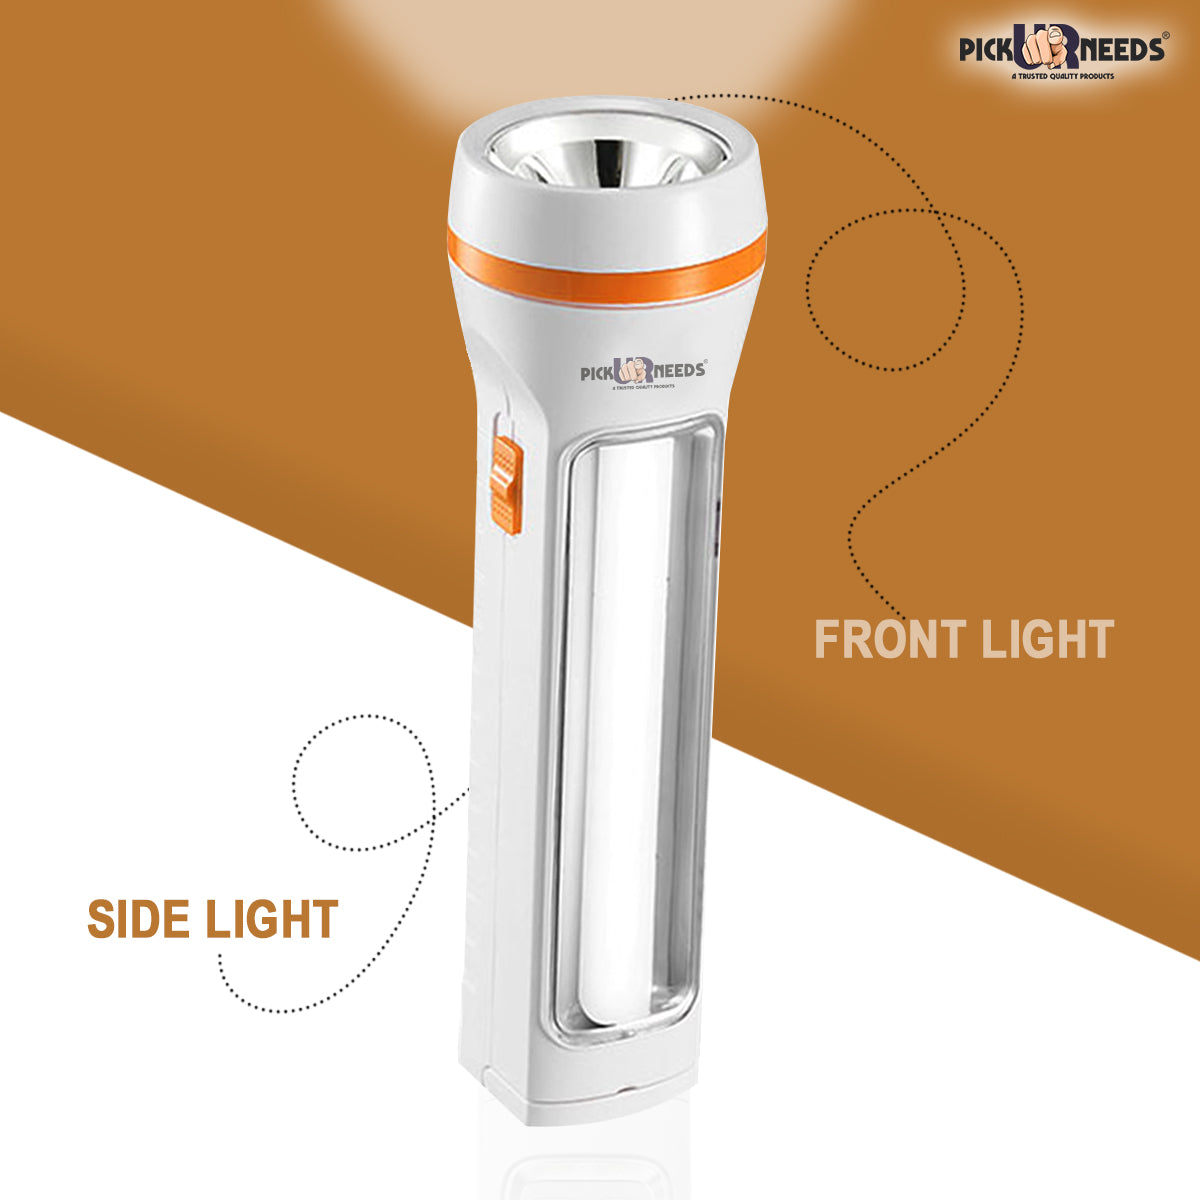 Pick Ur Needs Emergency Rechargeable LED 50W Search Torch Light With Slide Charging Plug